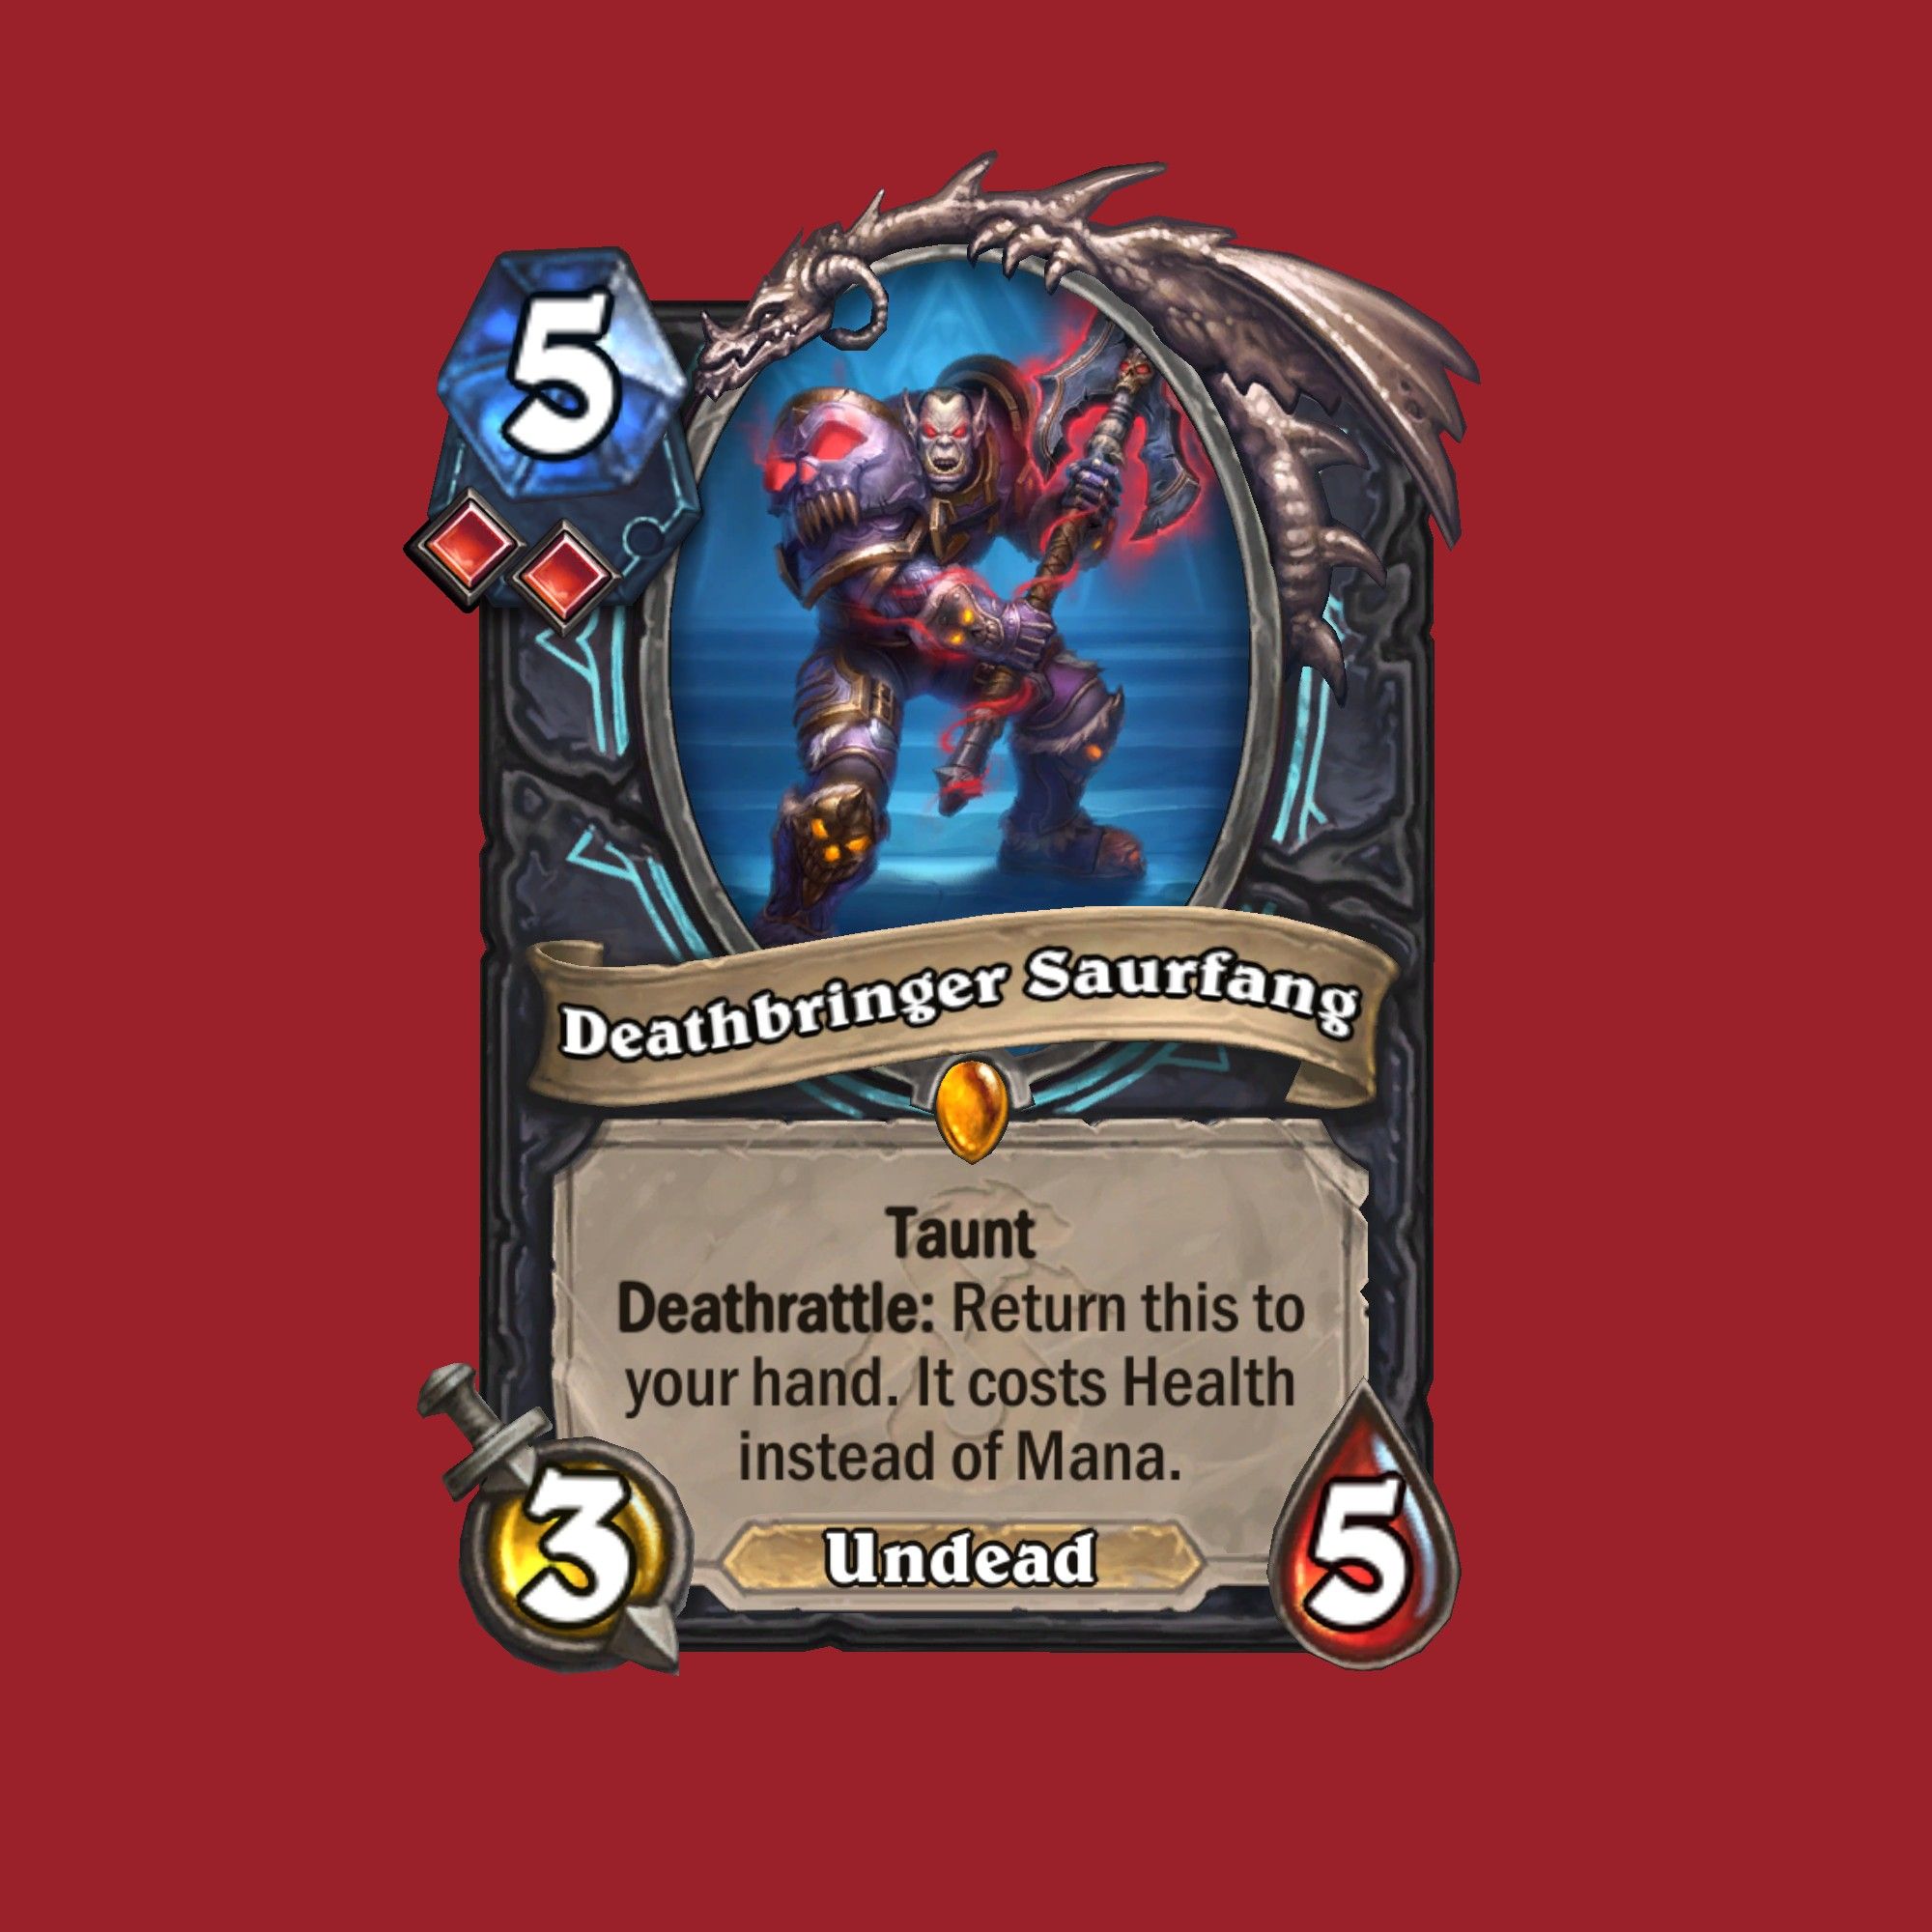 Deathbringer Saurfang Hearthstone card on a red background.